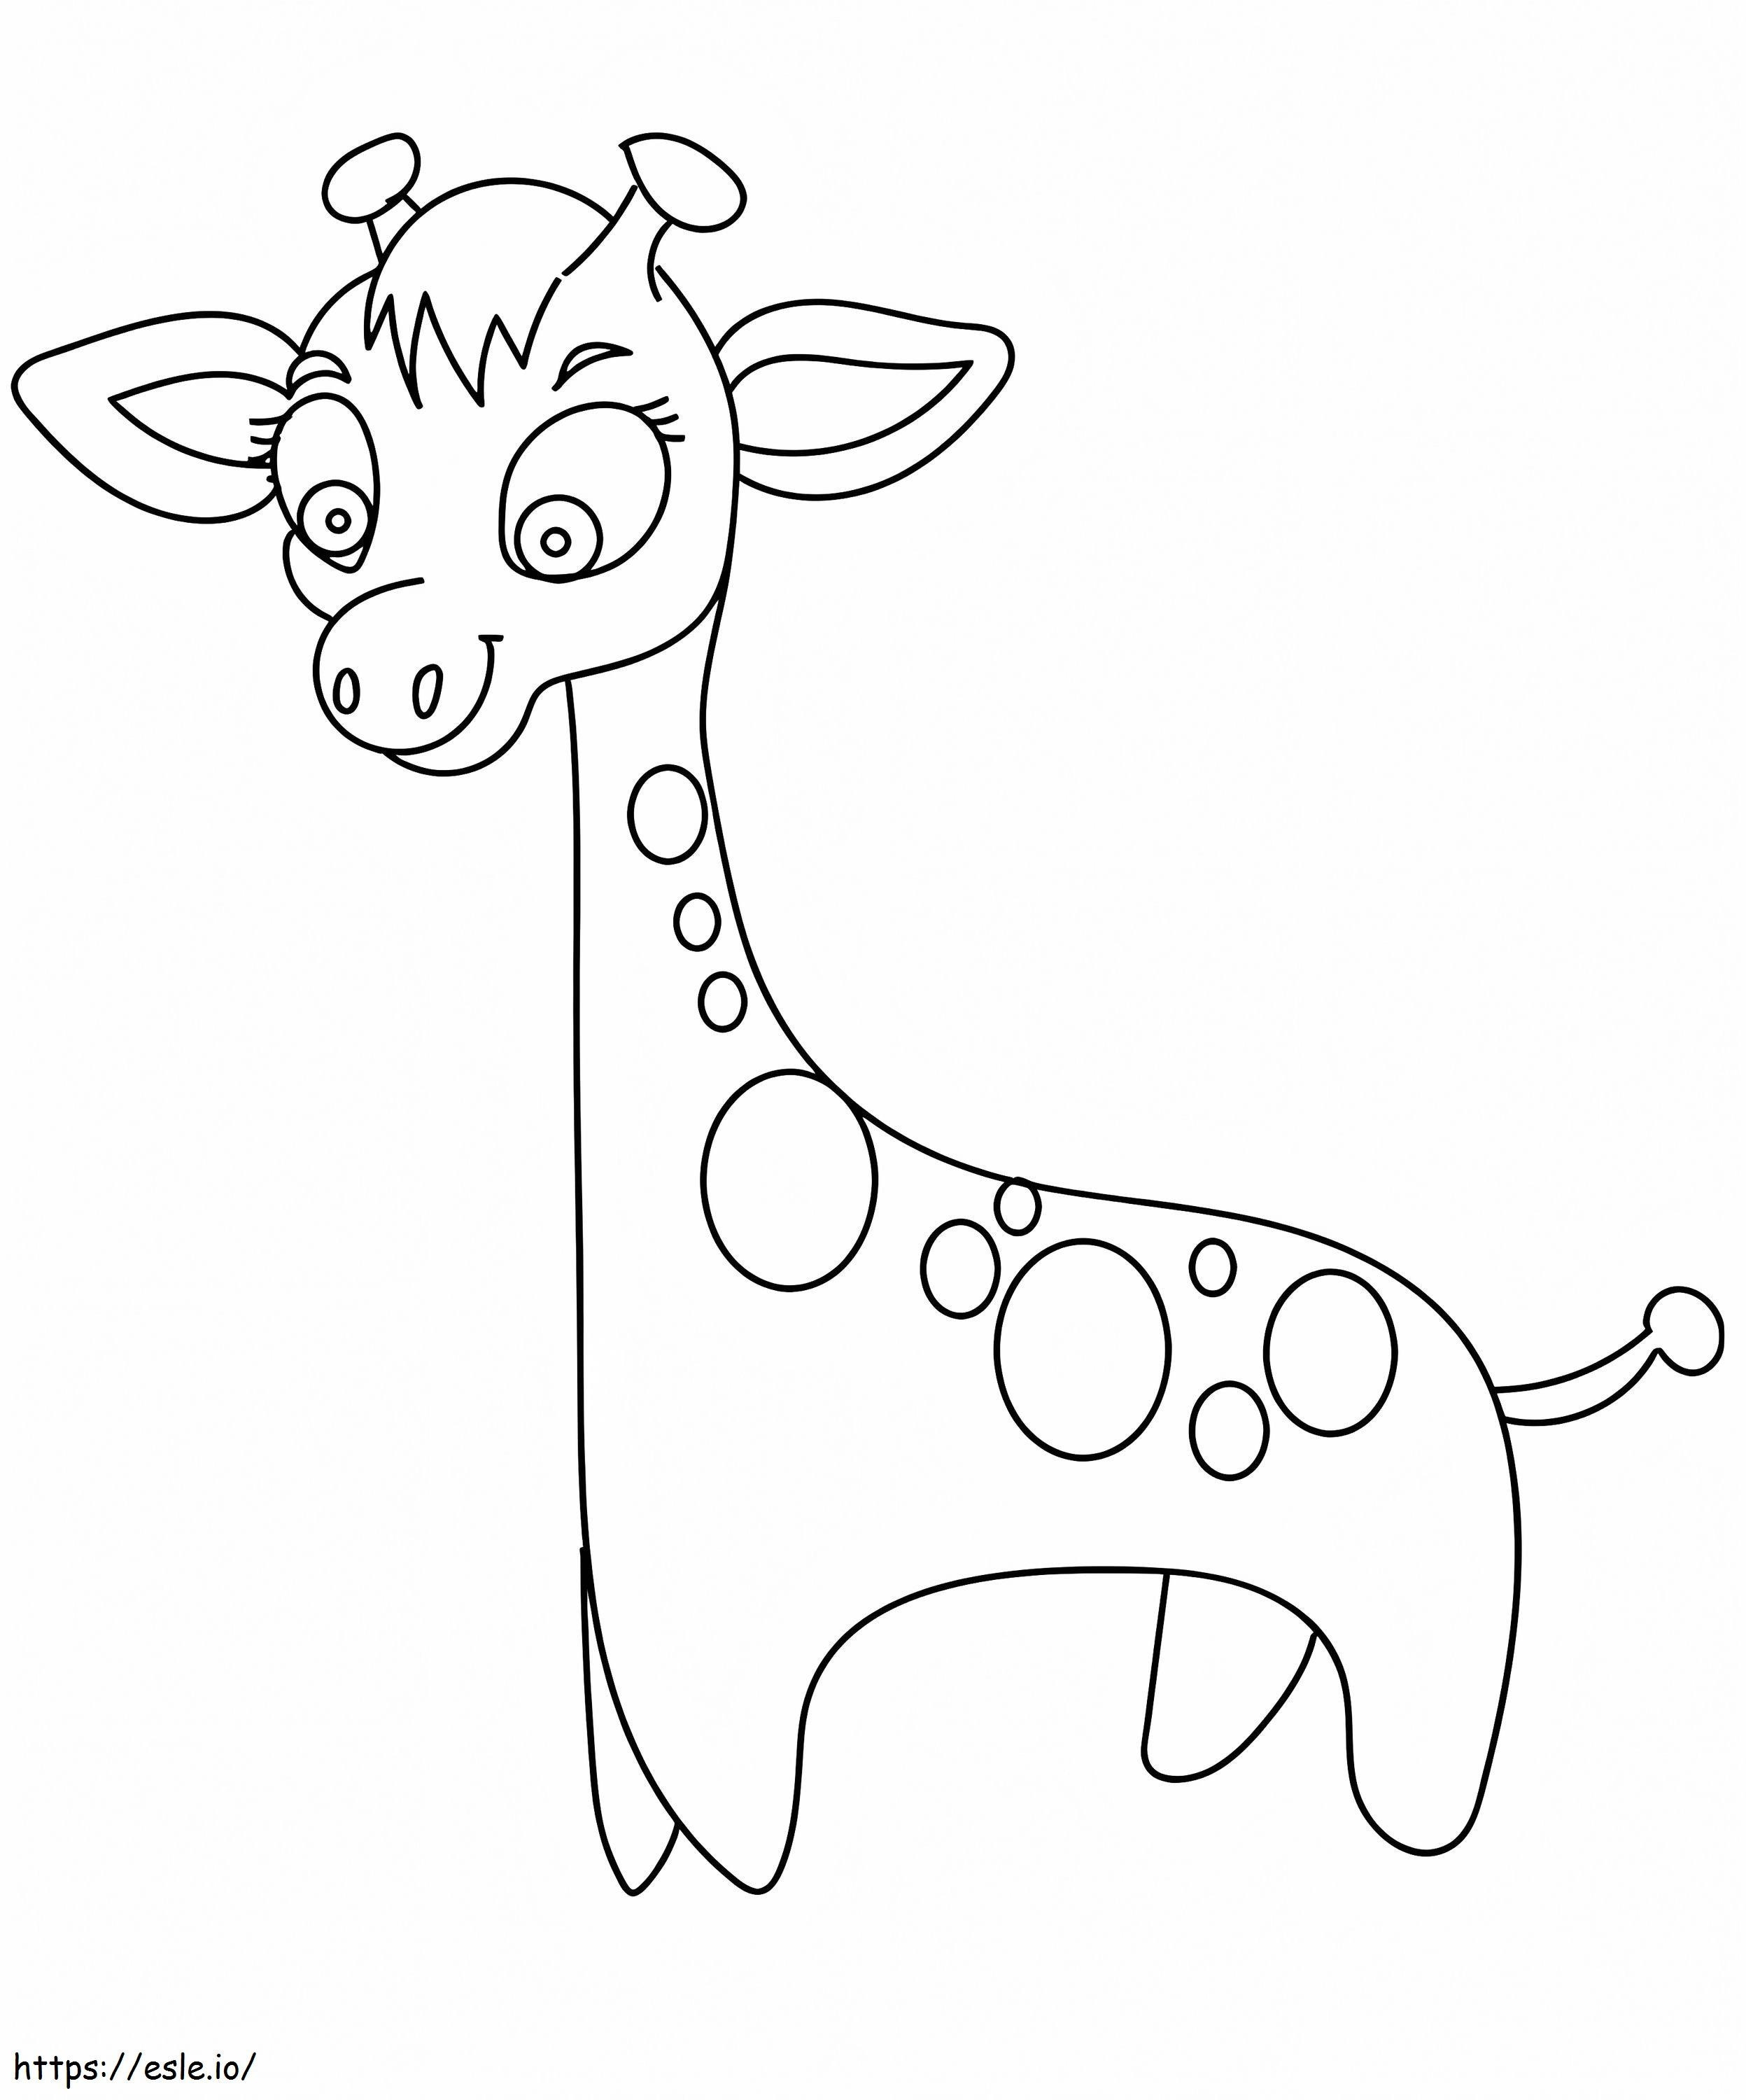 Easy Giraffe coloring page